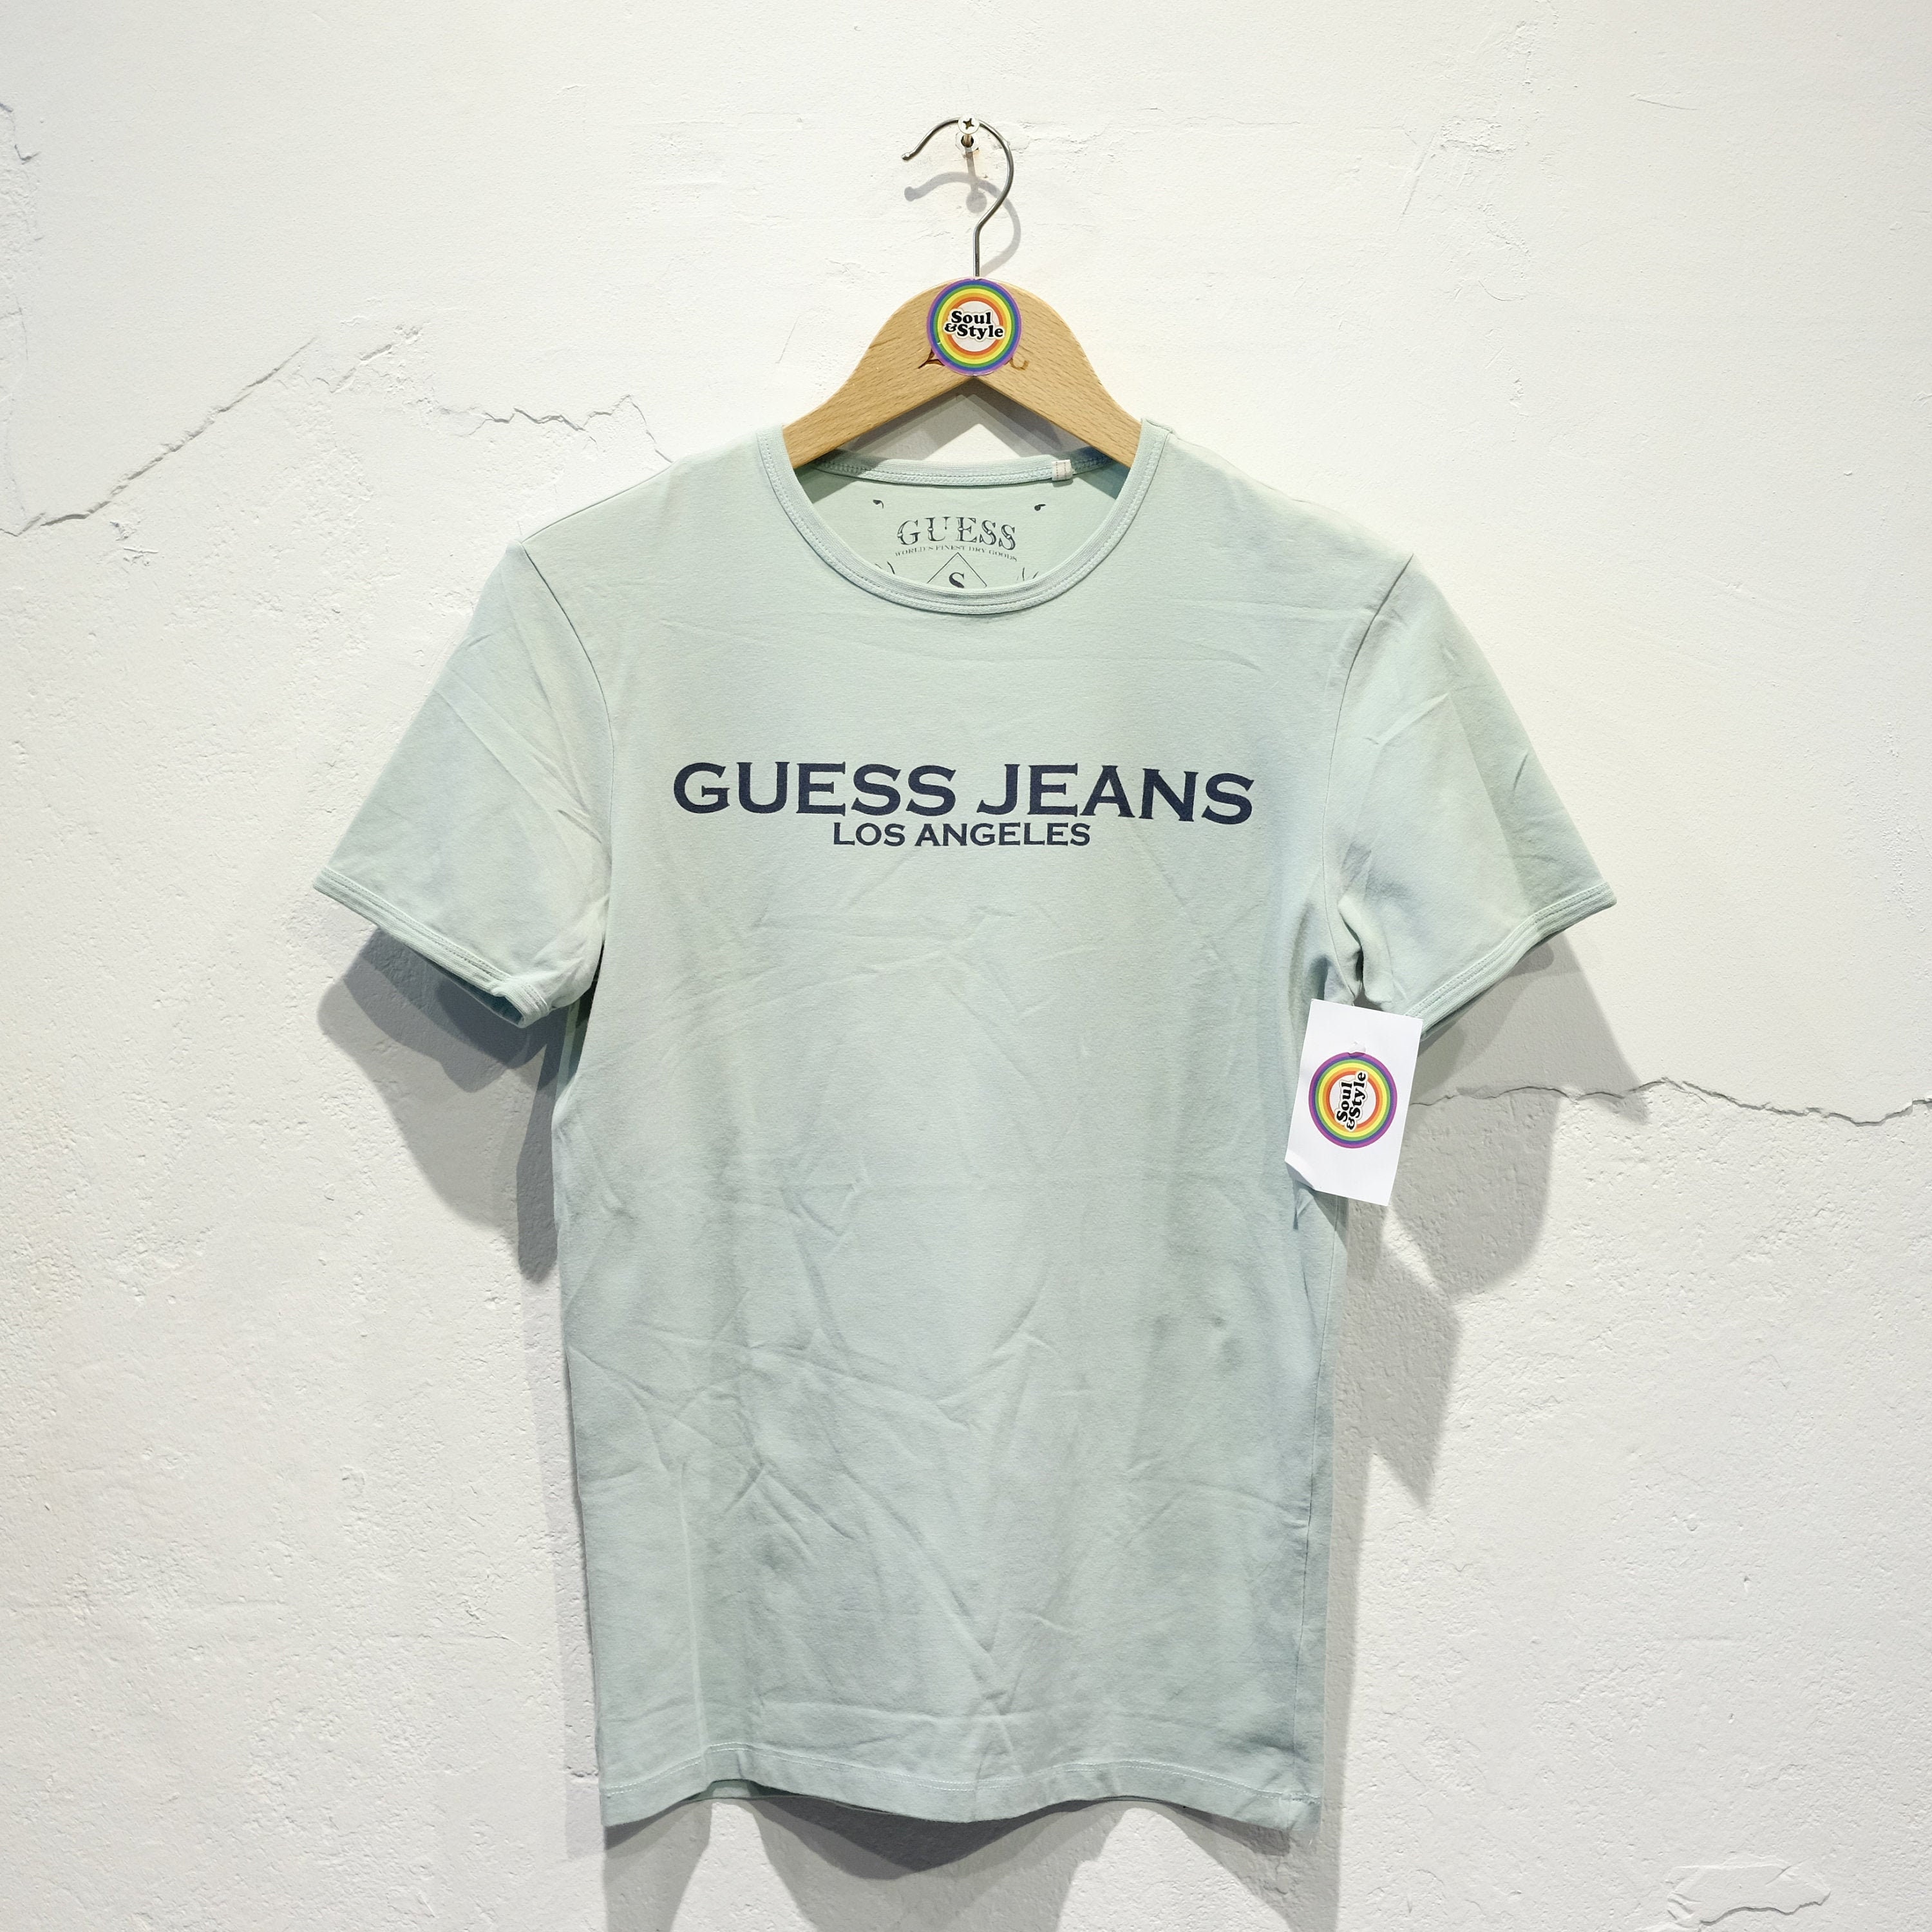 isolation omvendt buffet Guess Jeans T-shirt S Los Angeles - Etsy